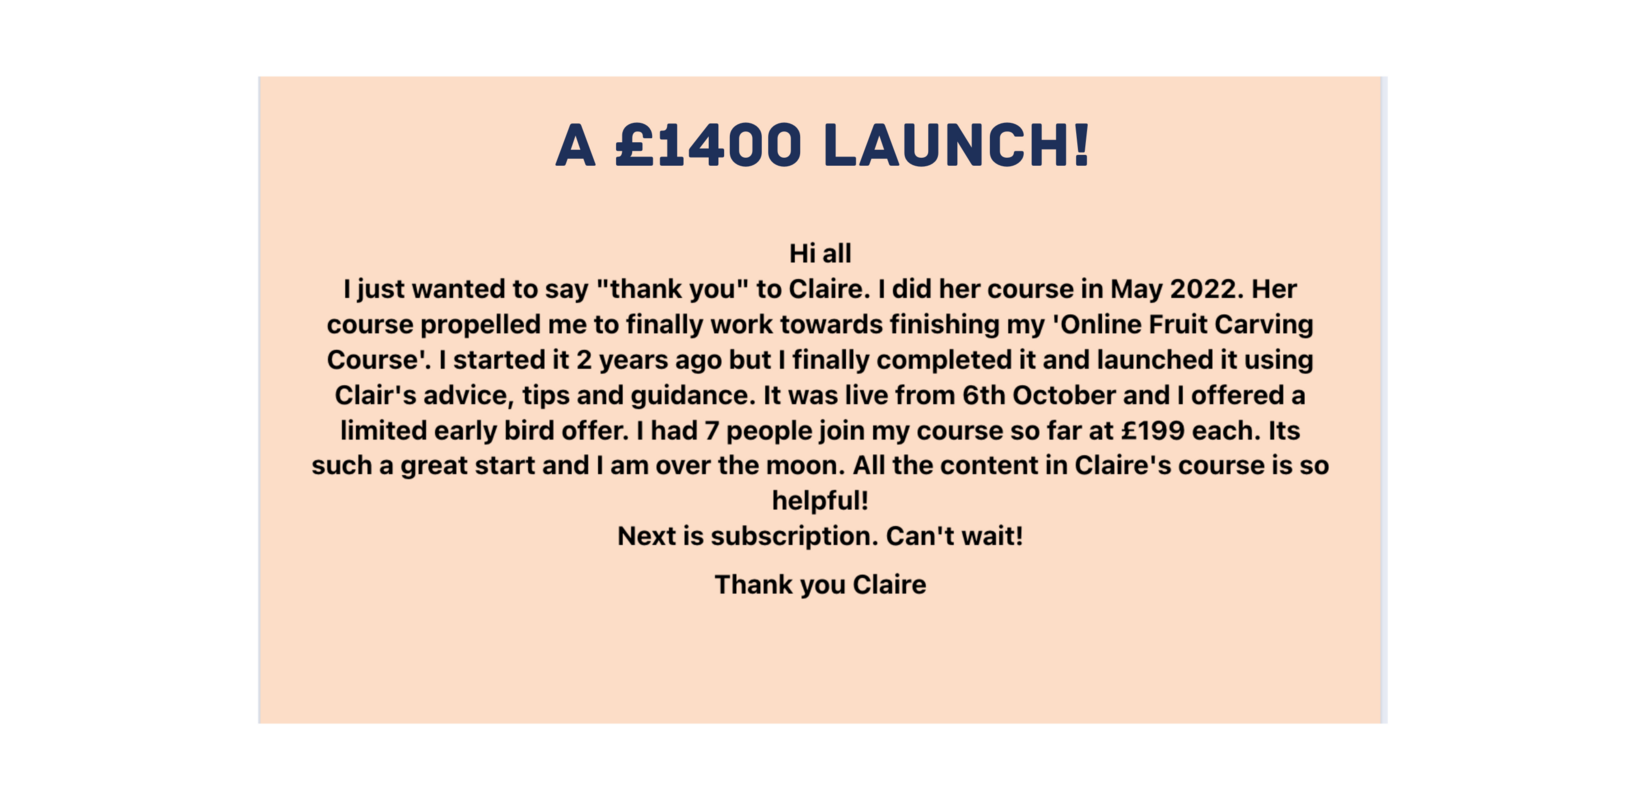 A £1400 launch!